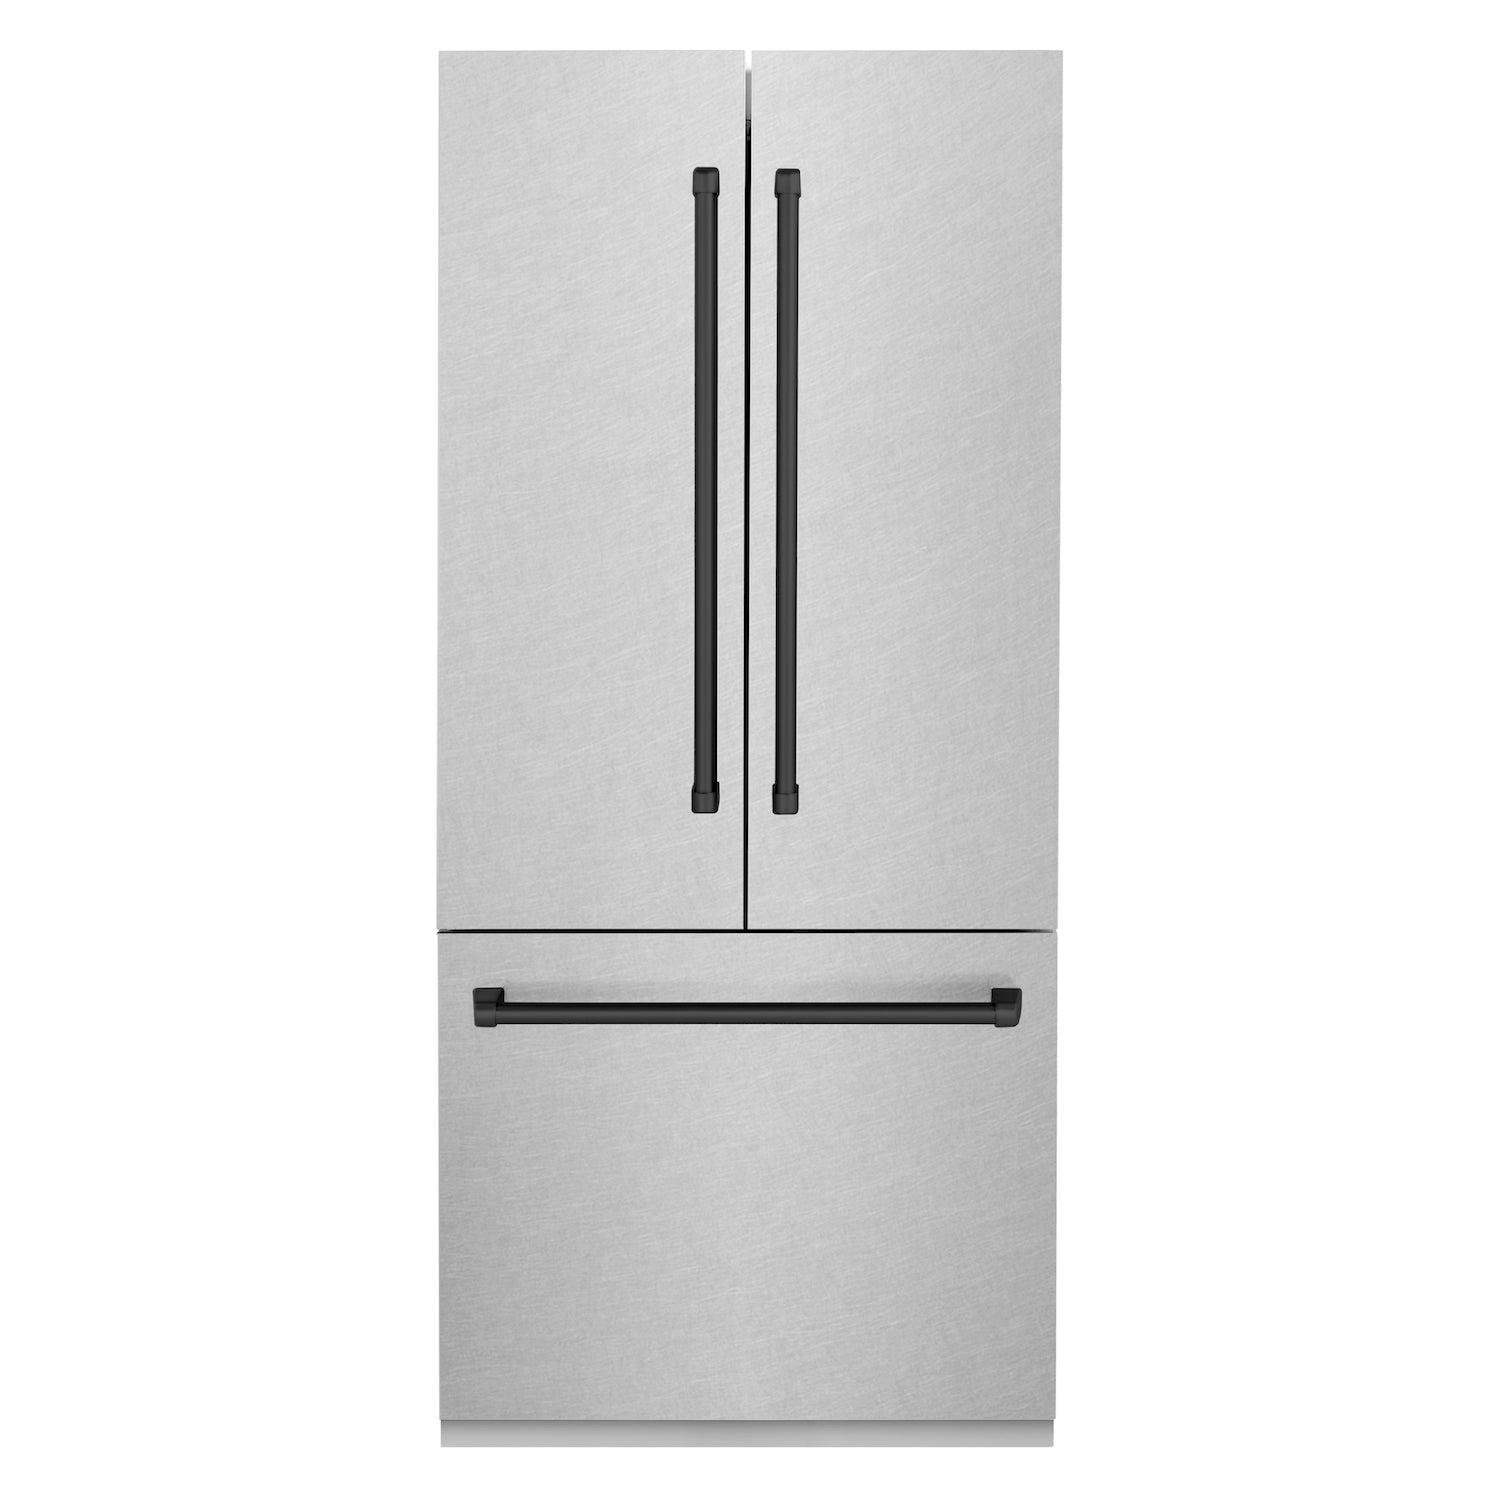 ZLINE Autograph Edition 36 in. 19.6 cu. ft. Built-in 2-Door Bottom Freezer Refrigerator with Internal Water and Ice Dispenser in Fingerprint Resistant Stainless Steel with Matte Black Accents (RBIVZ-SN-36-MB) front, closed.